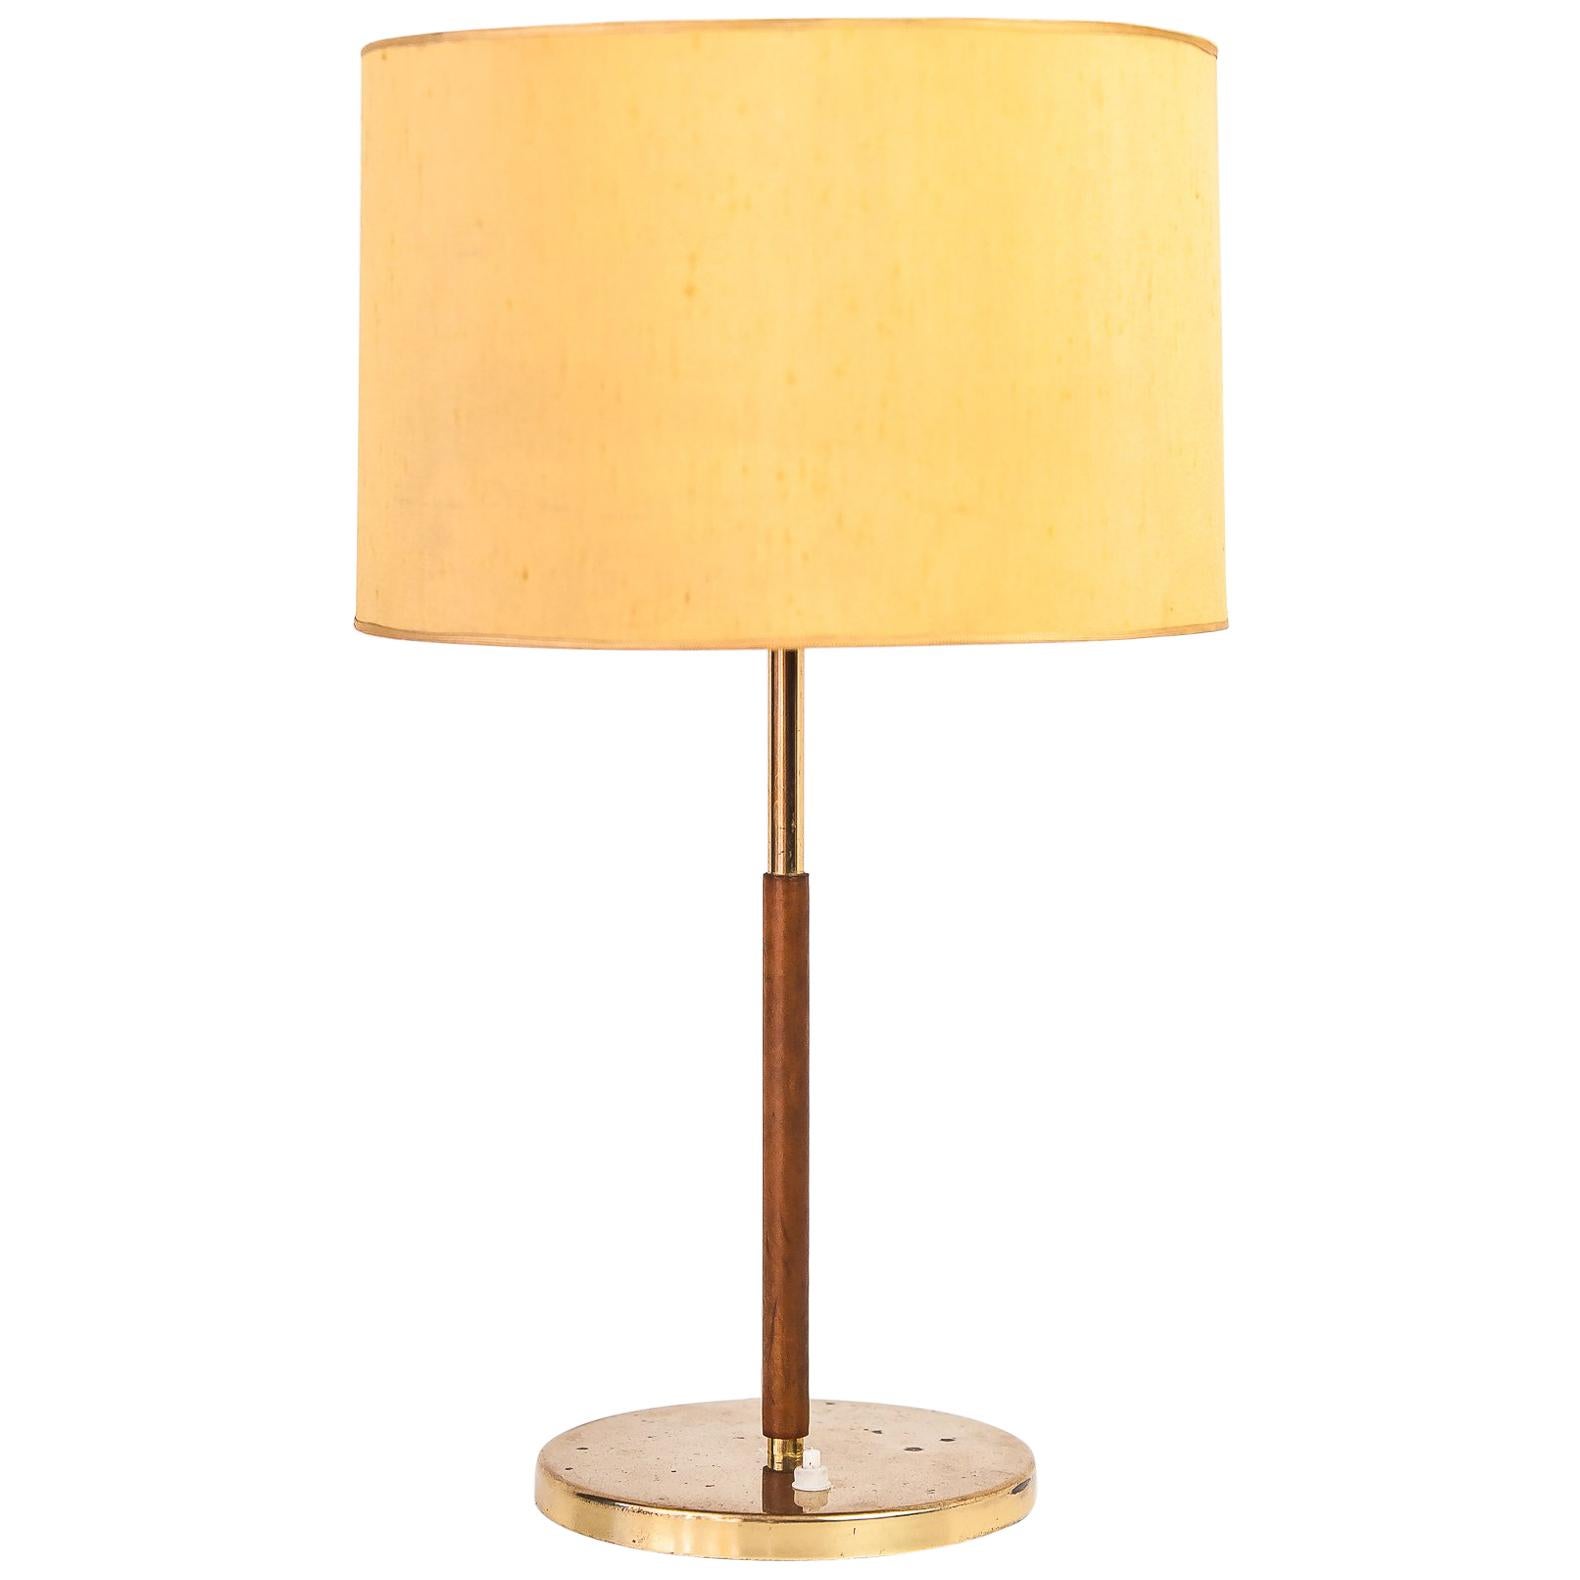 Kalmar Table Lamps with Leather Covered Stem and Yellow Shade, Austria, 1950s